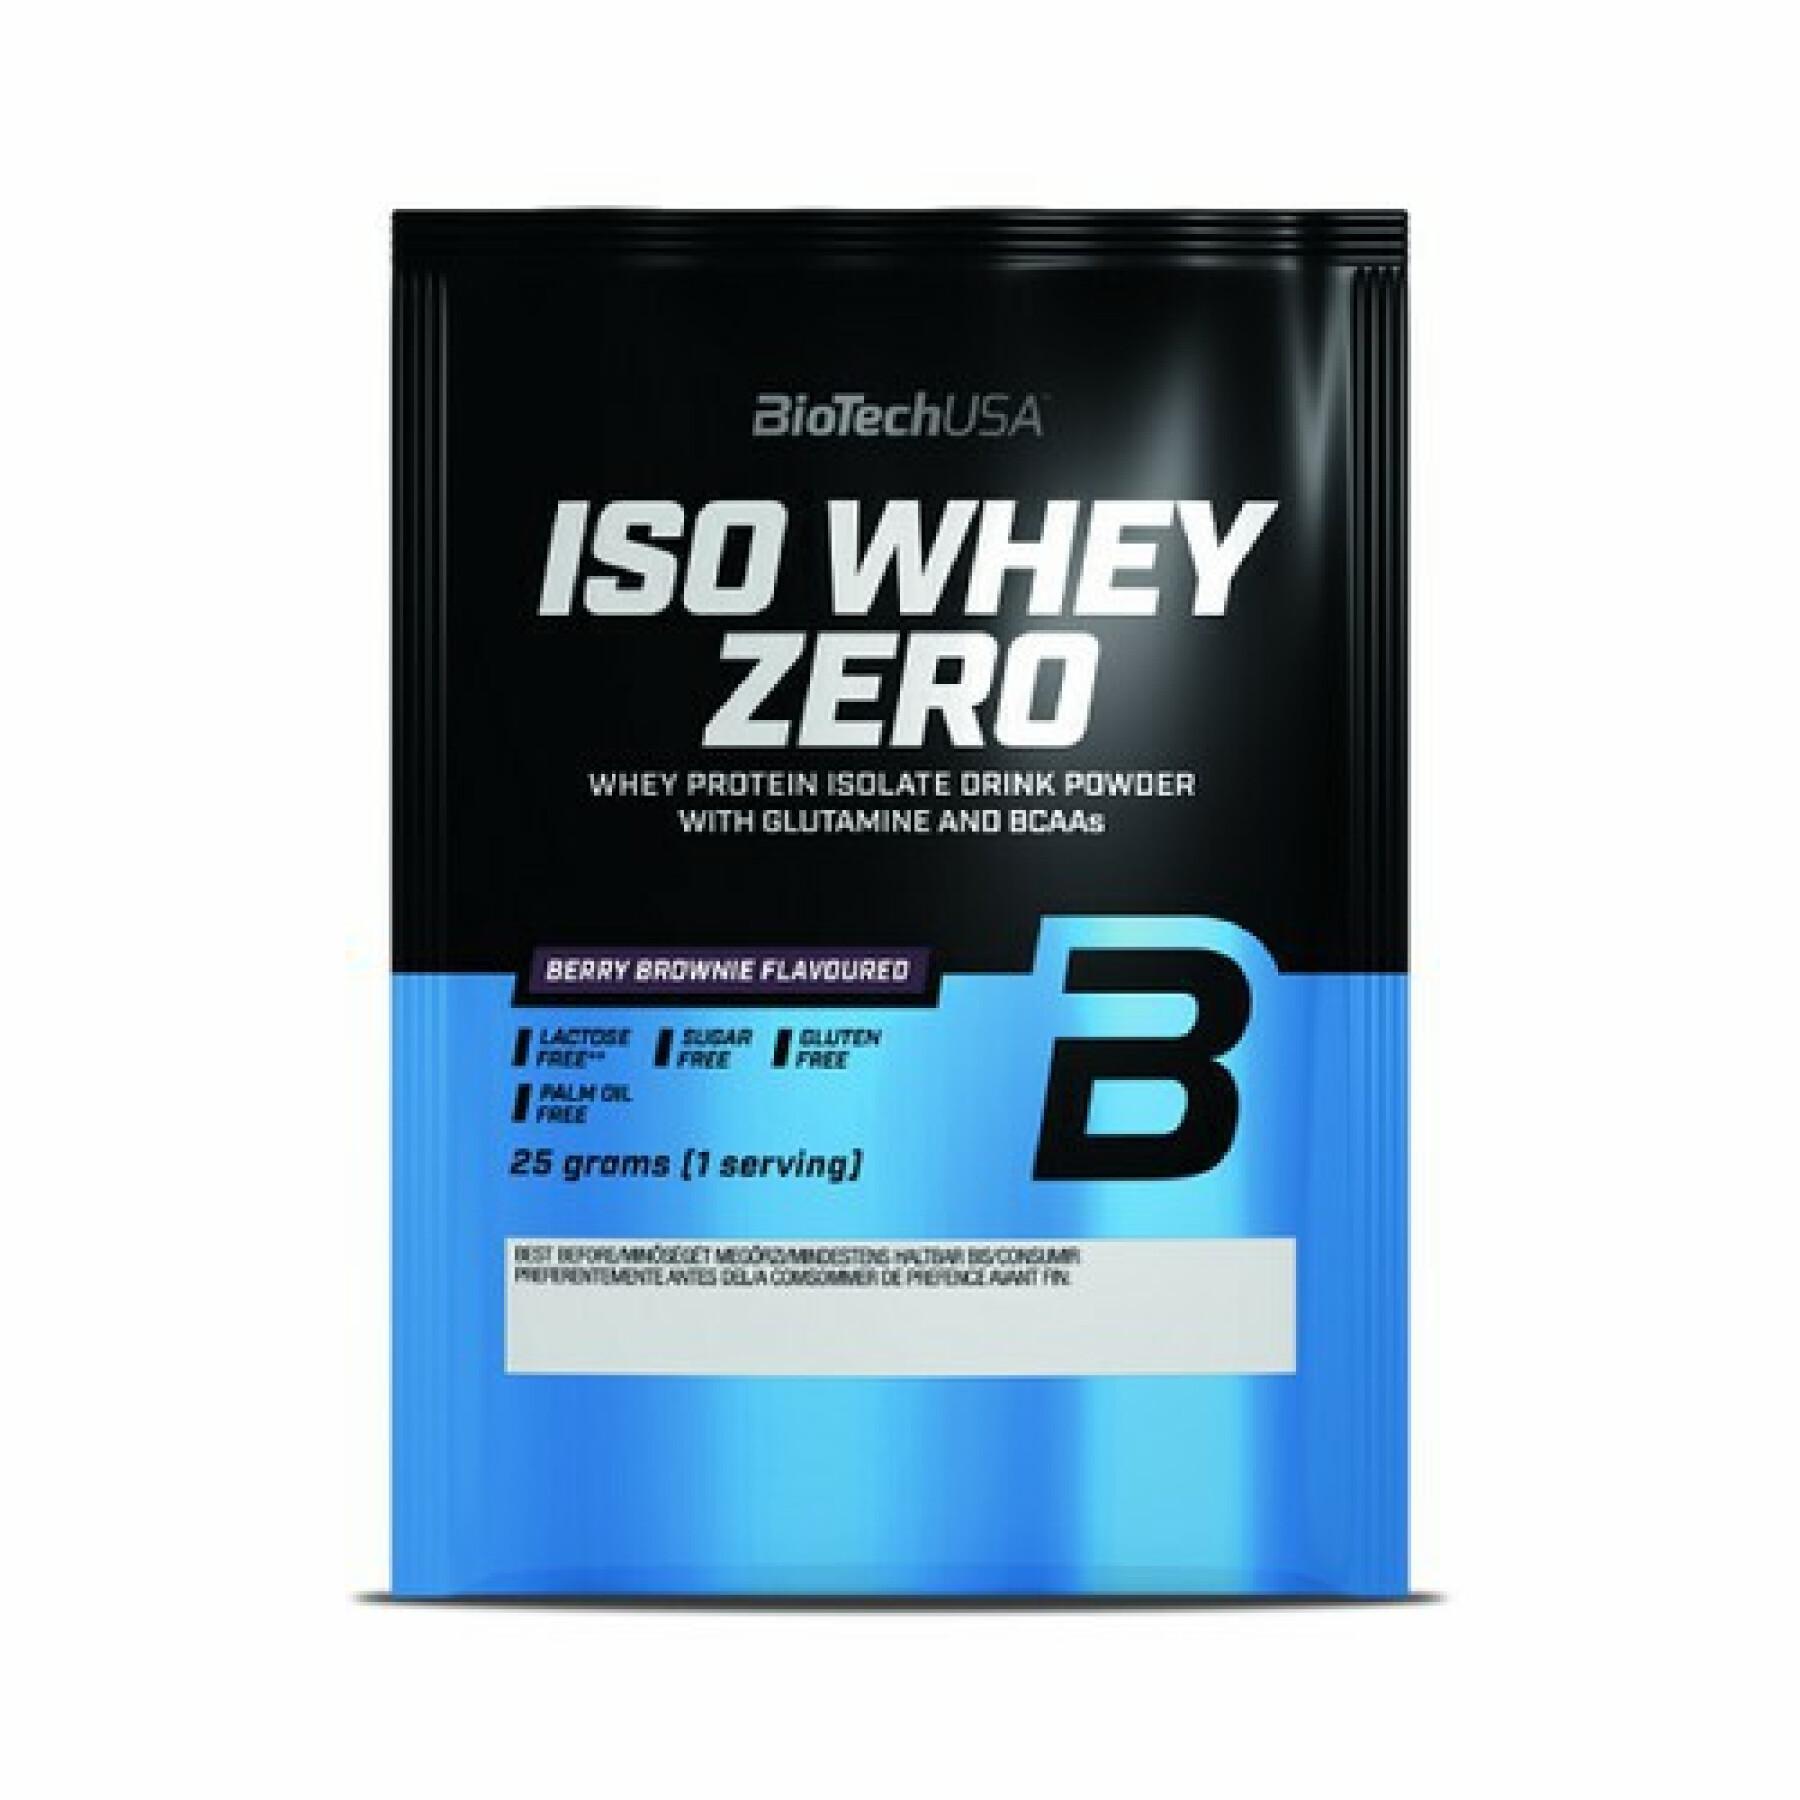 Förpackning med 50 laktosfria proteinpåsar Biotech USA iso whey zero - Brownie aux fruits rouges - 25g